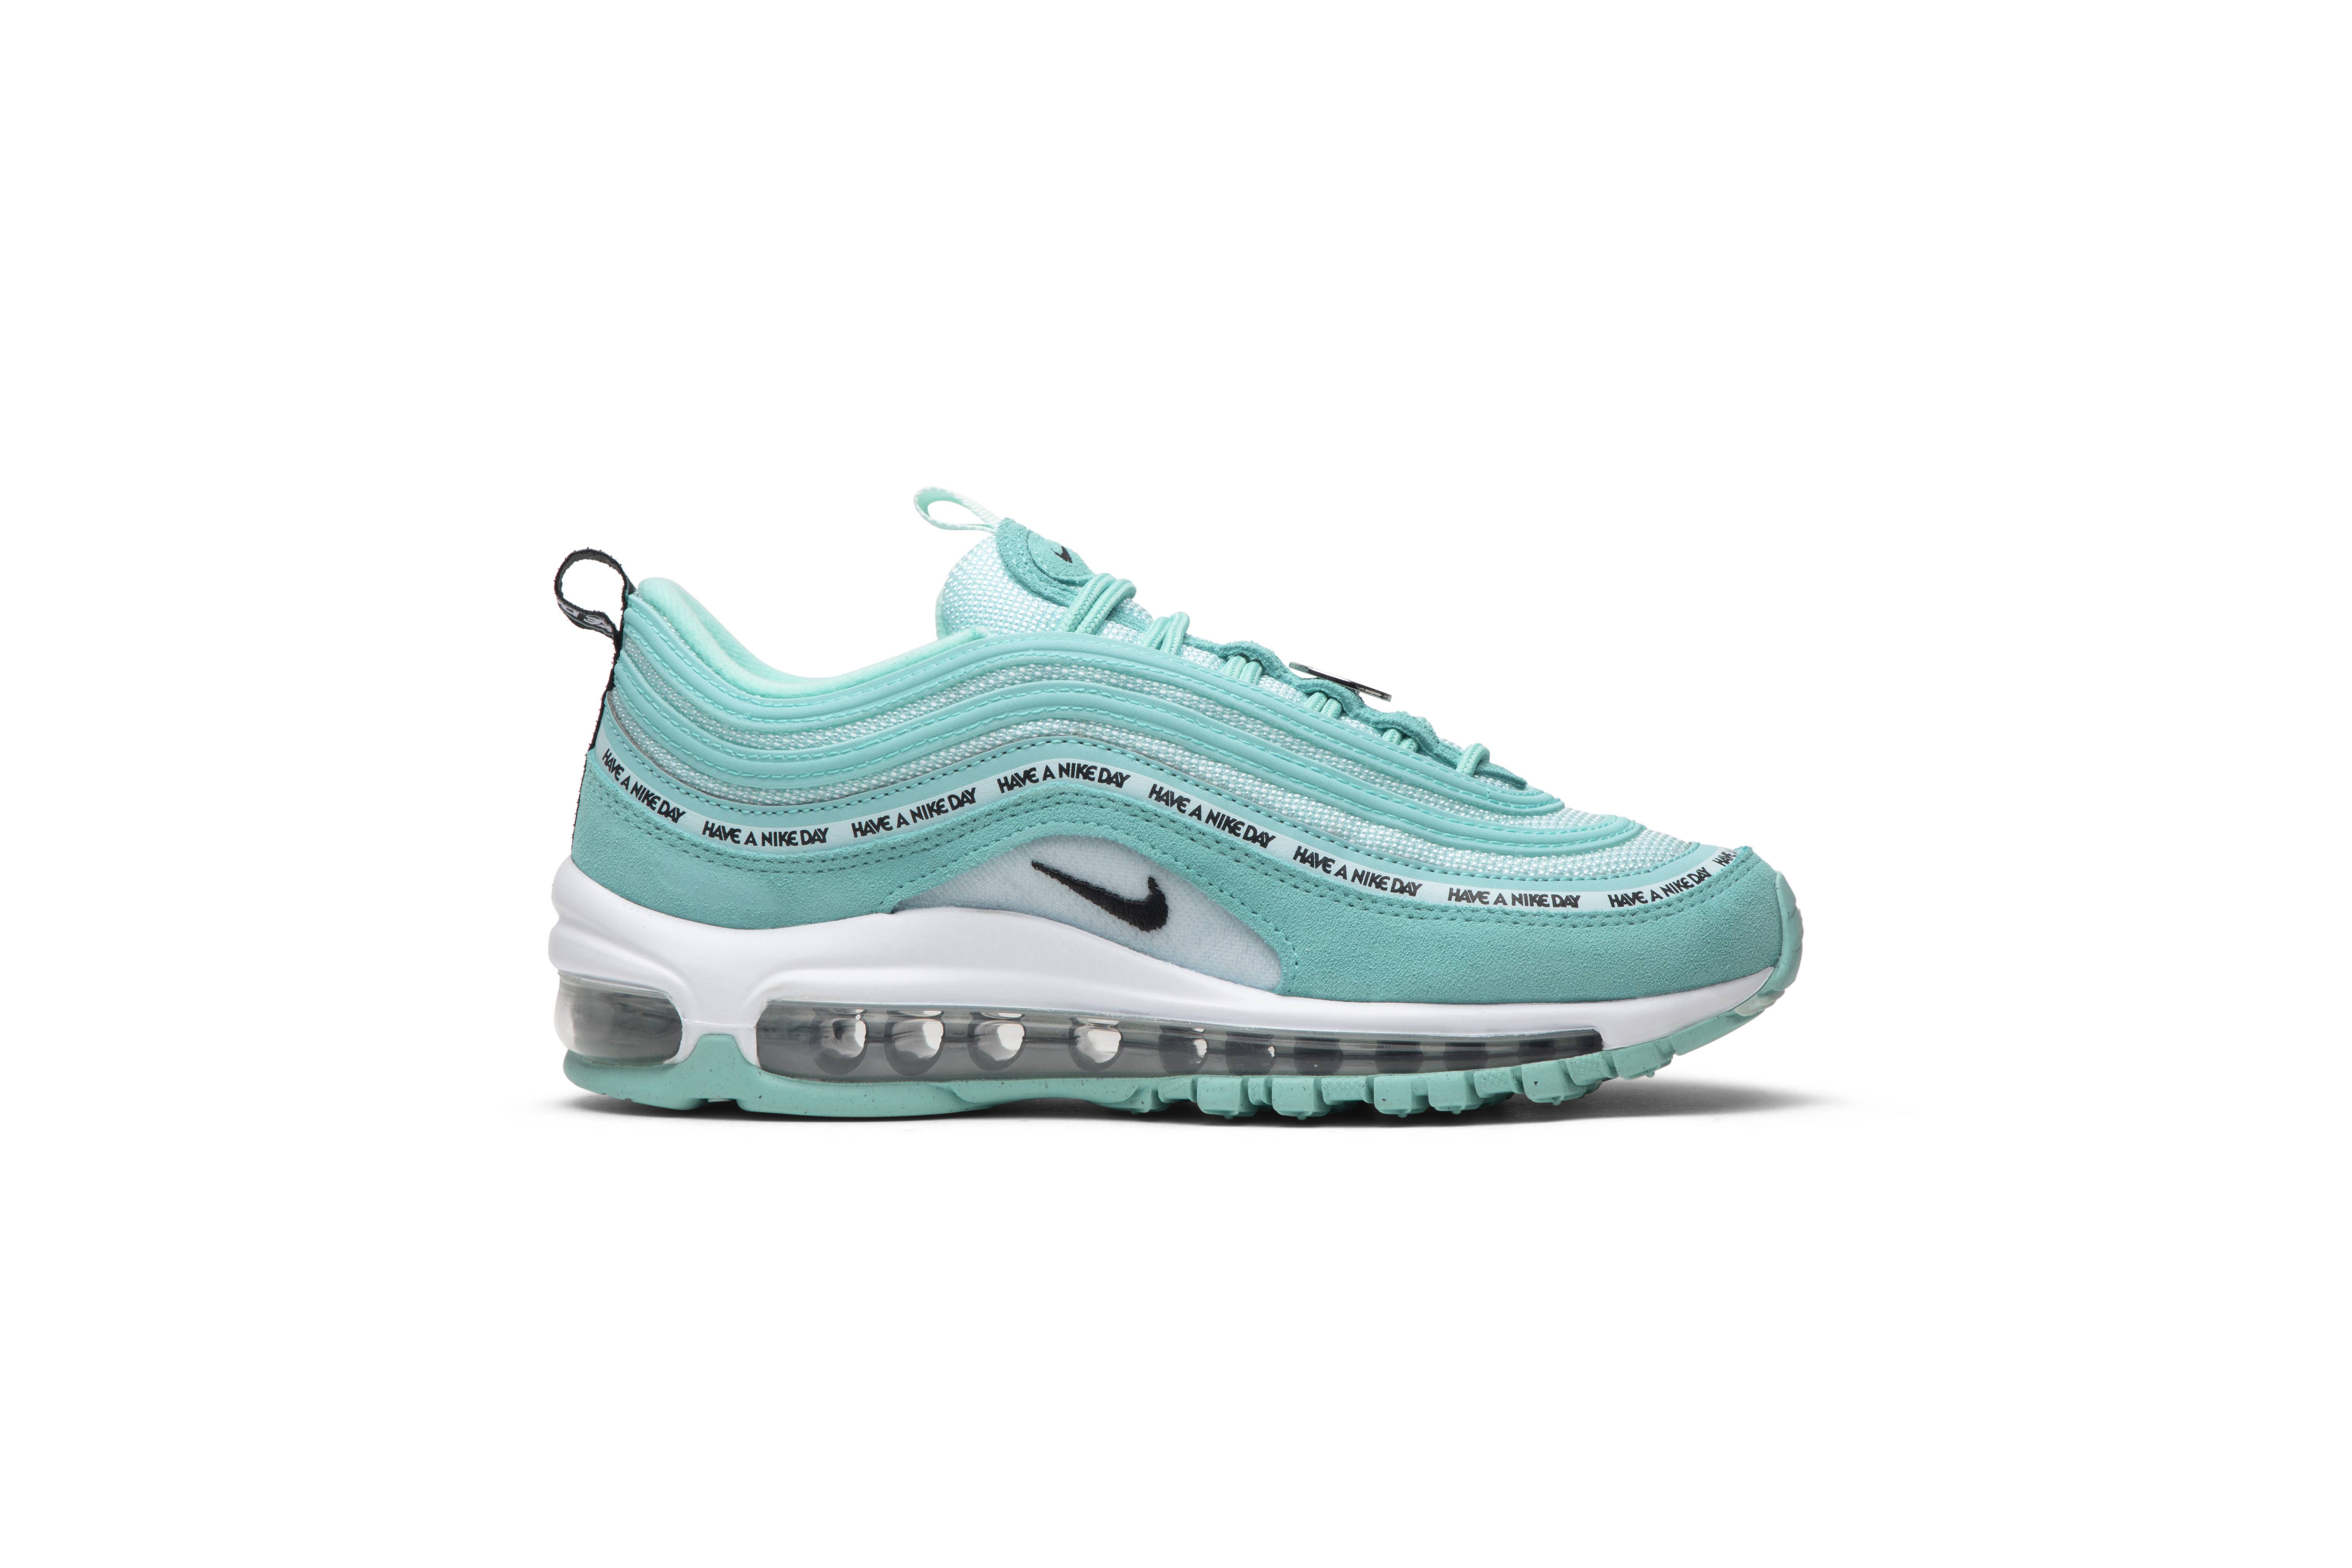 nike air max 97 have a nice day blue